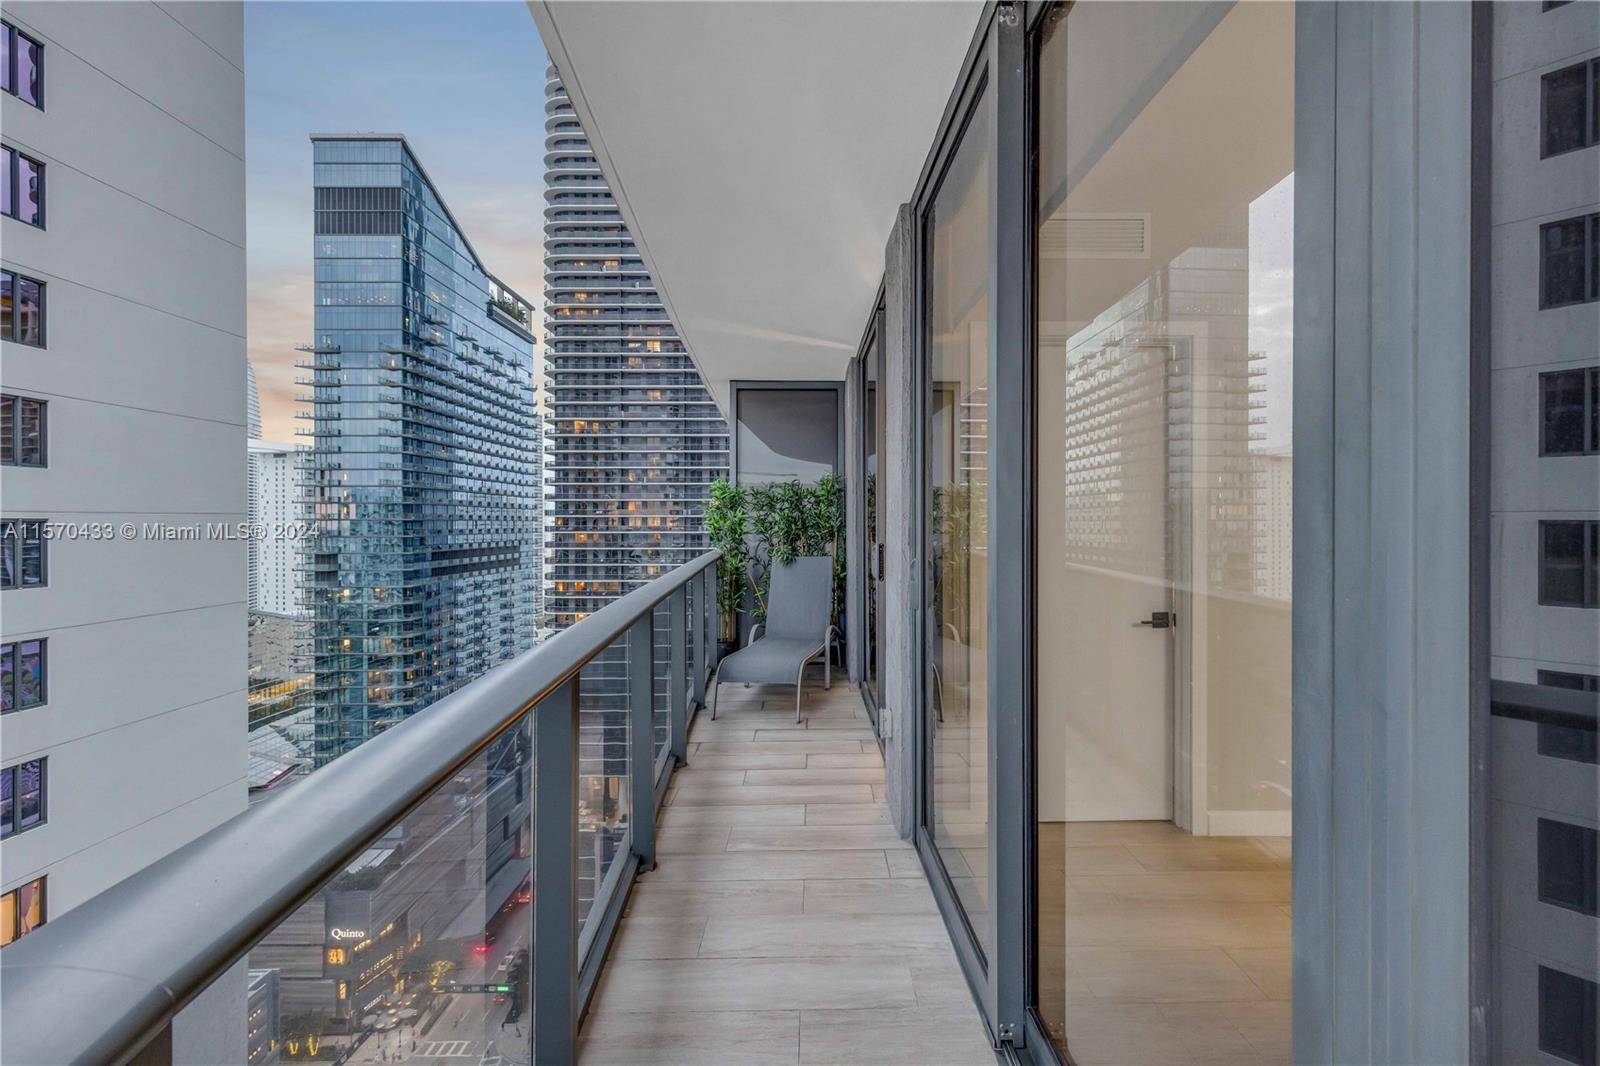 Beautiful 2 bedroom, 2 full bathroom corner unit in Brickell Heights West designed by Arquitectonica in 2017 with wrap around balcony accessible from both bedrooms and living room, with gorgeous ...